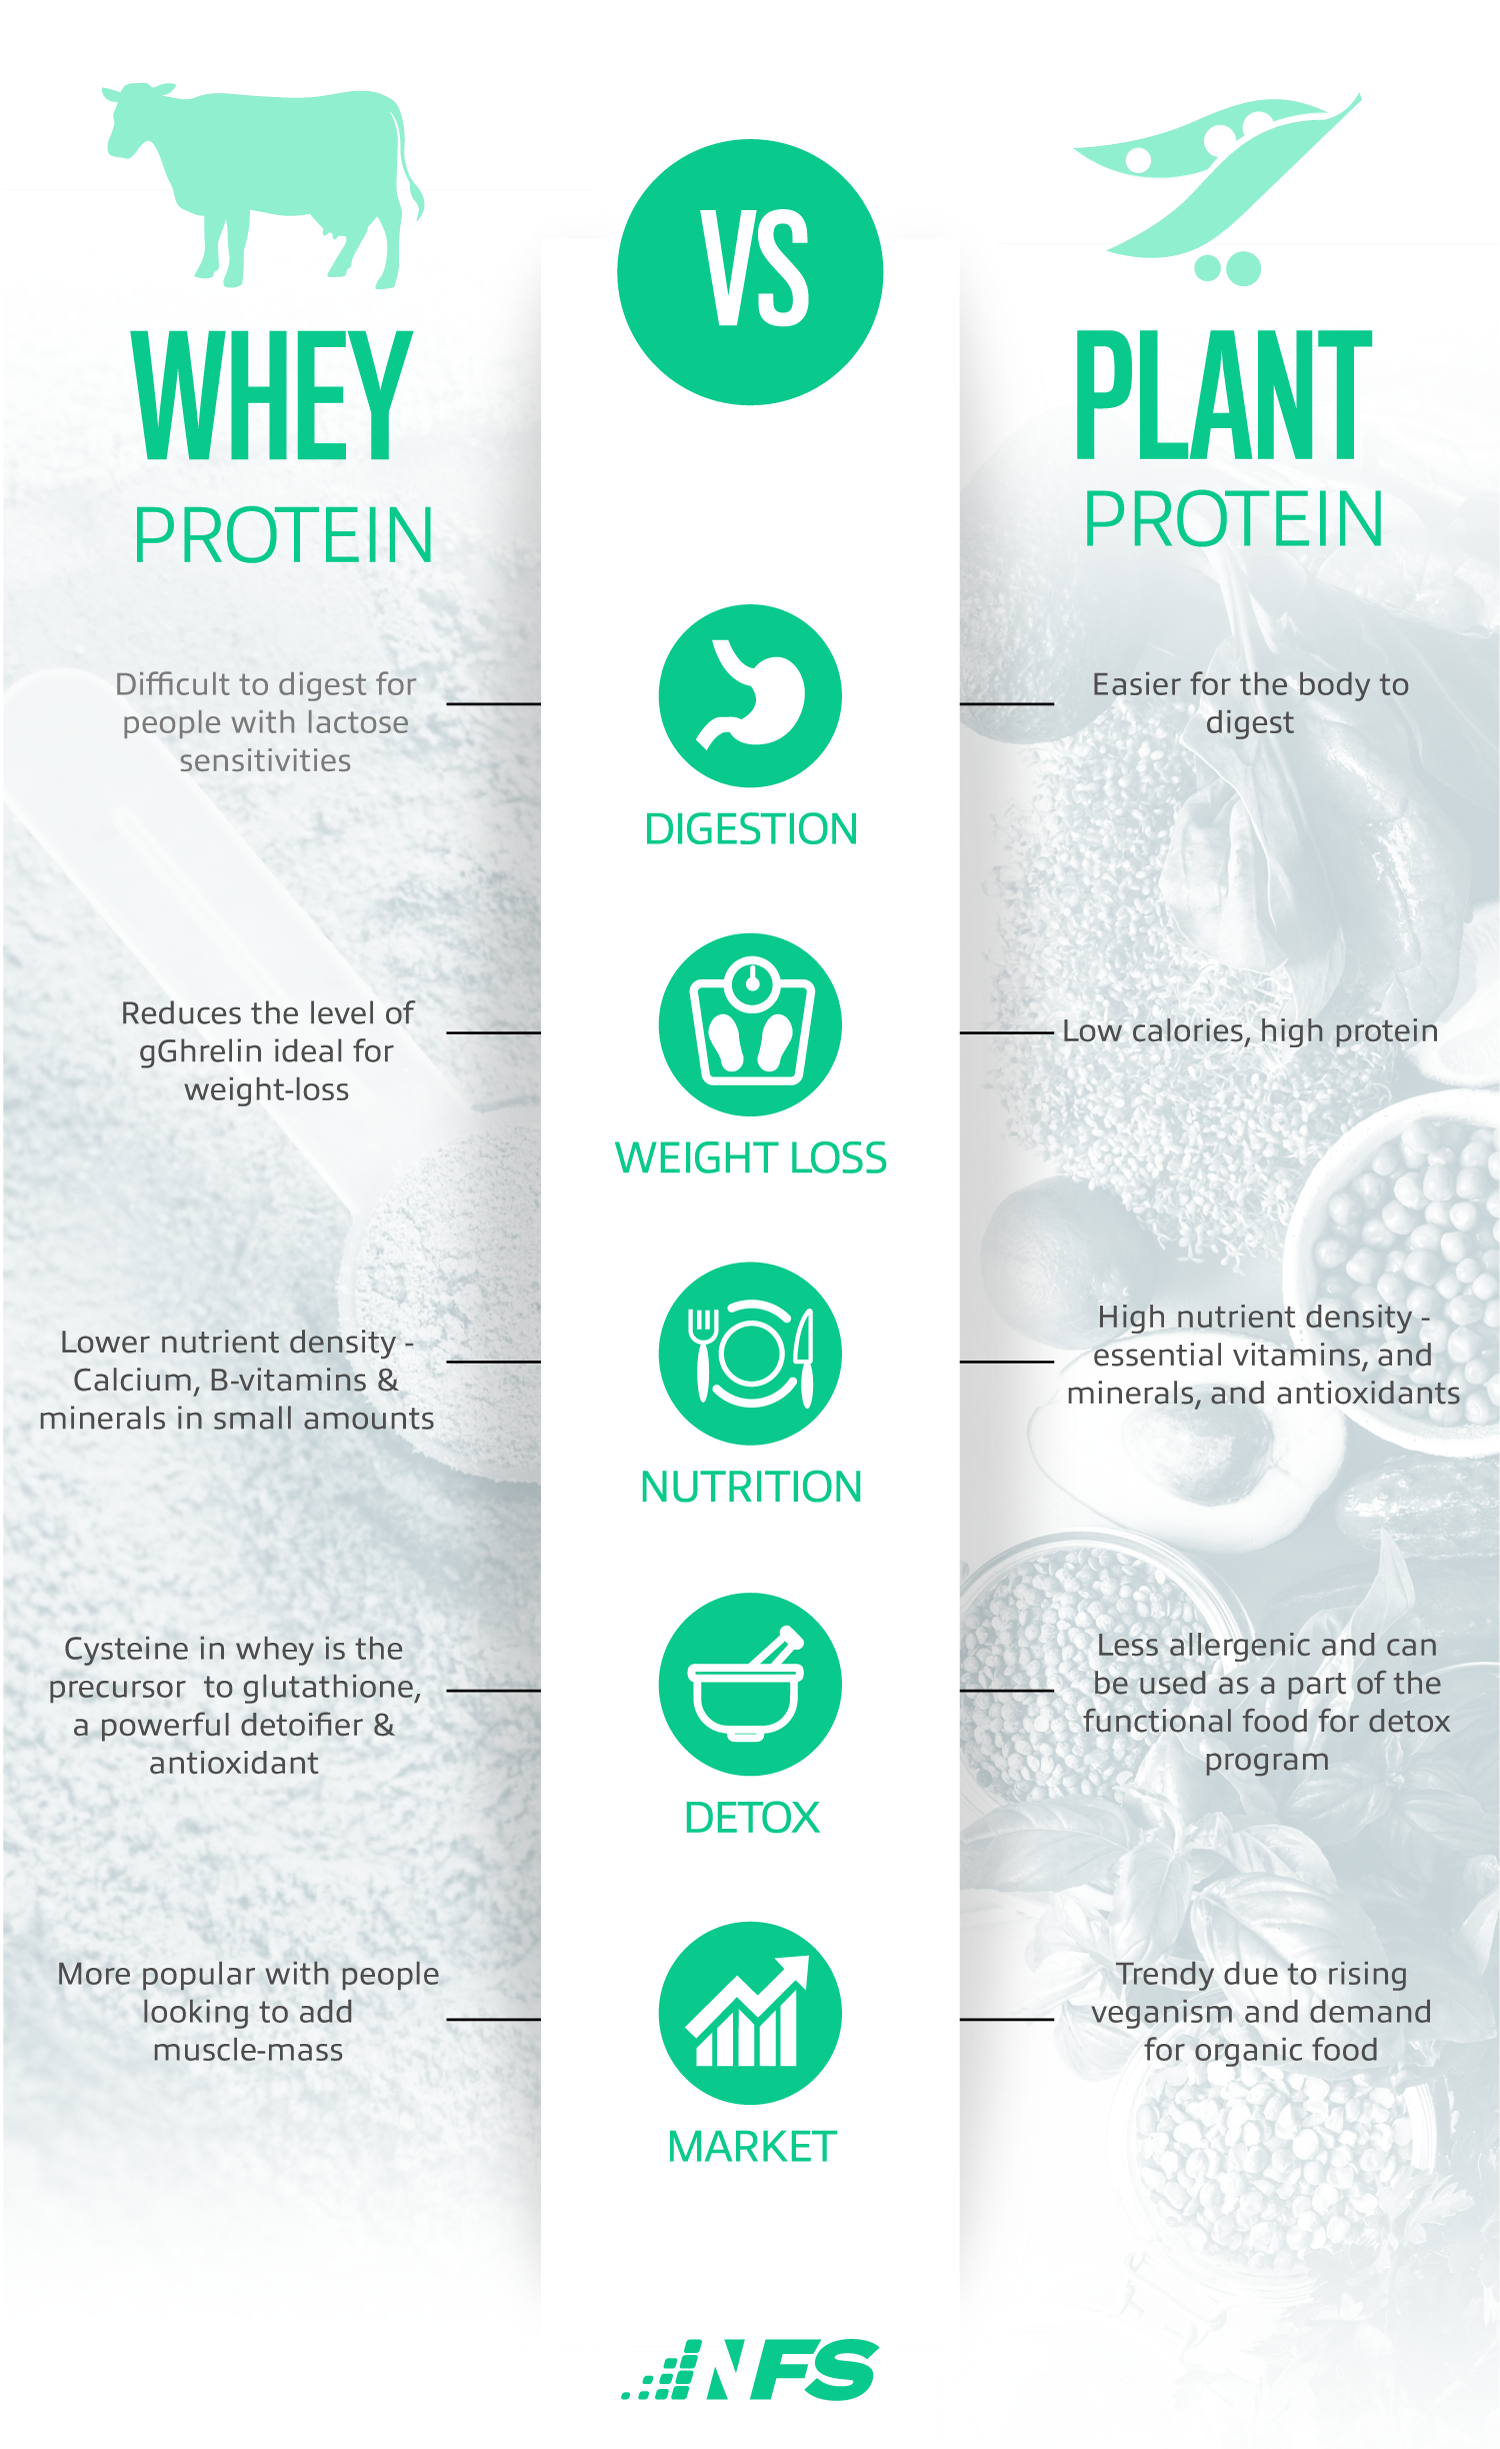 Plant-Based Protein vs Whey Protein